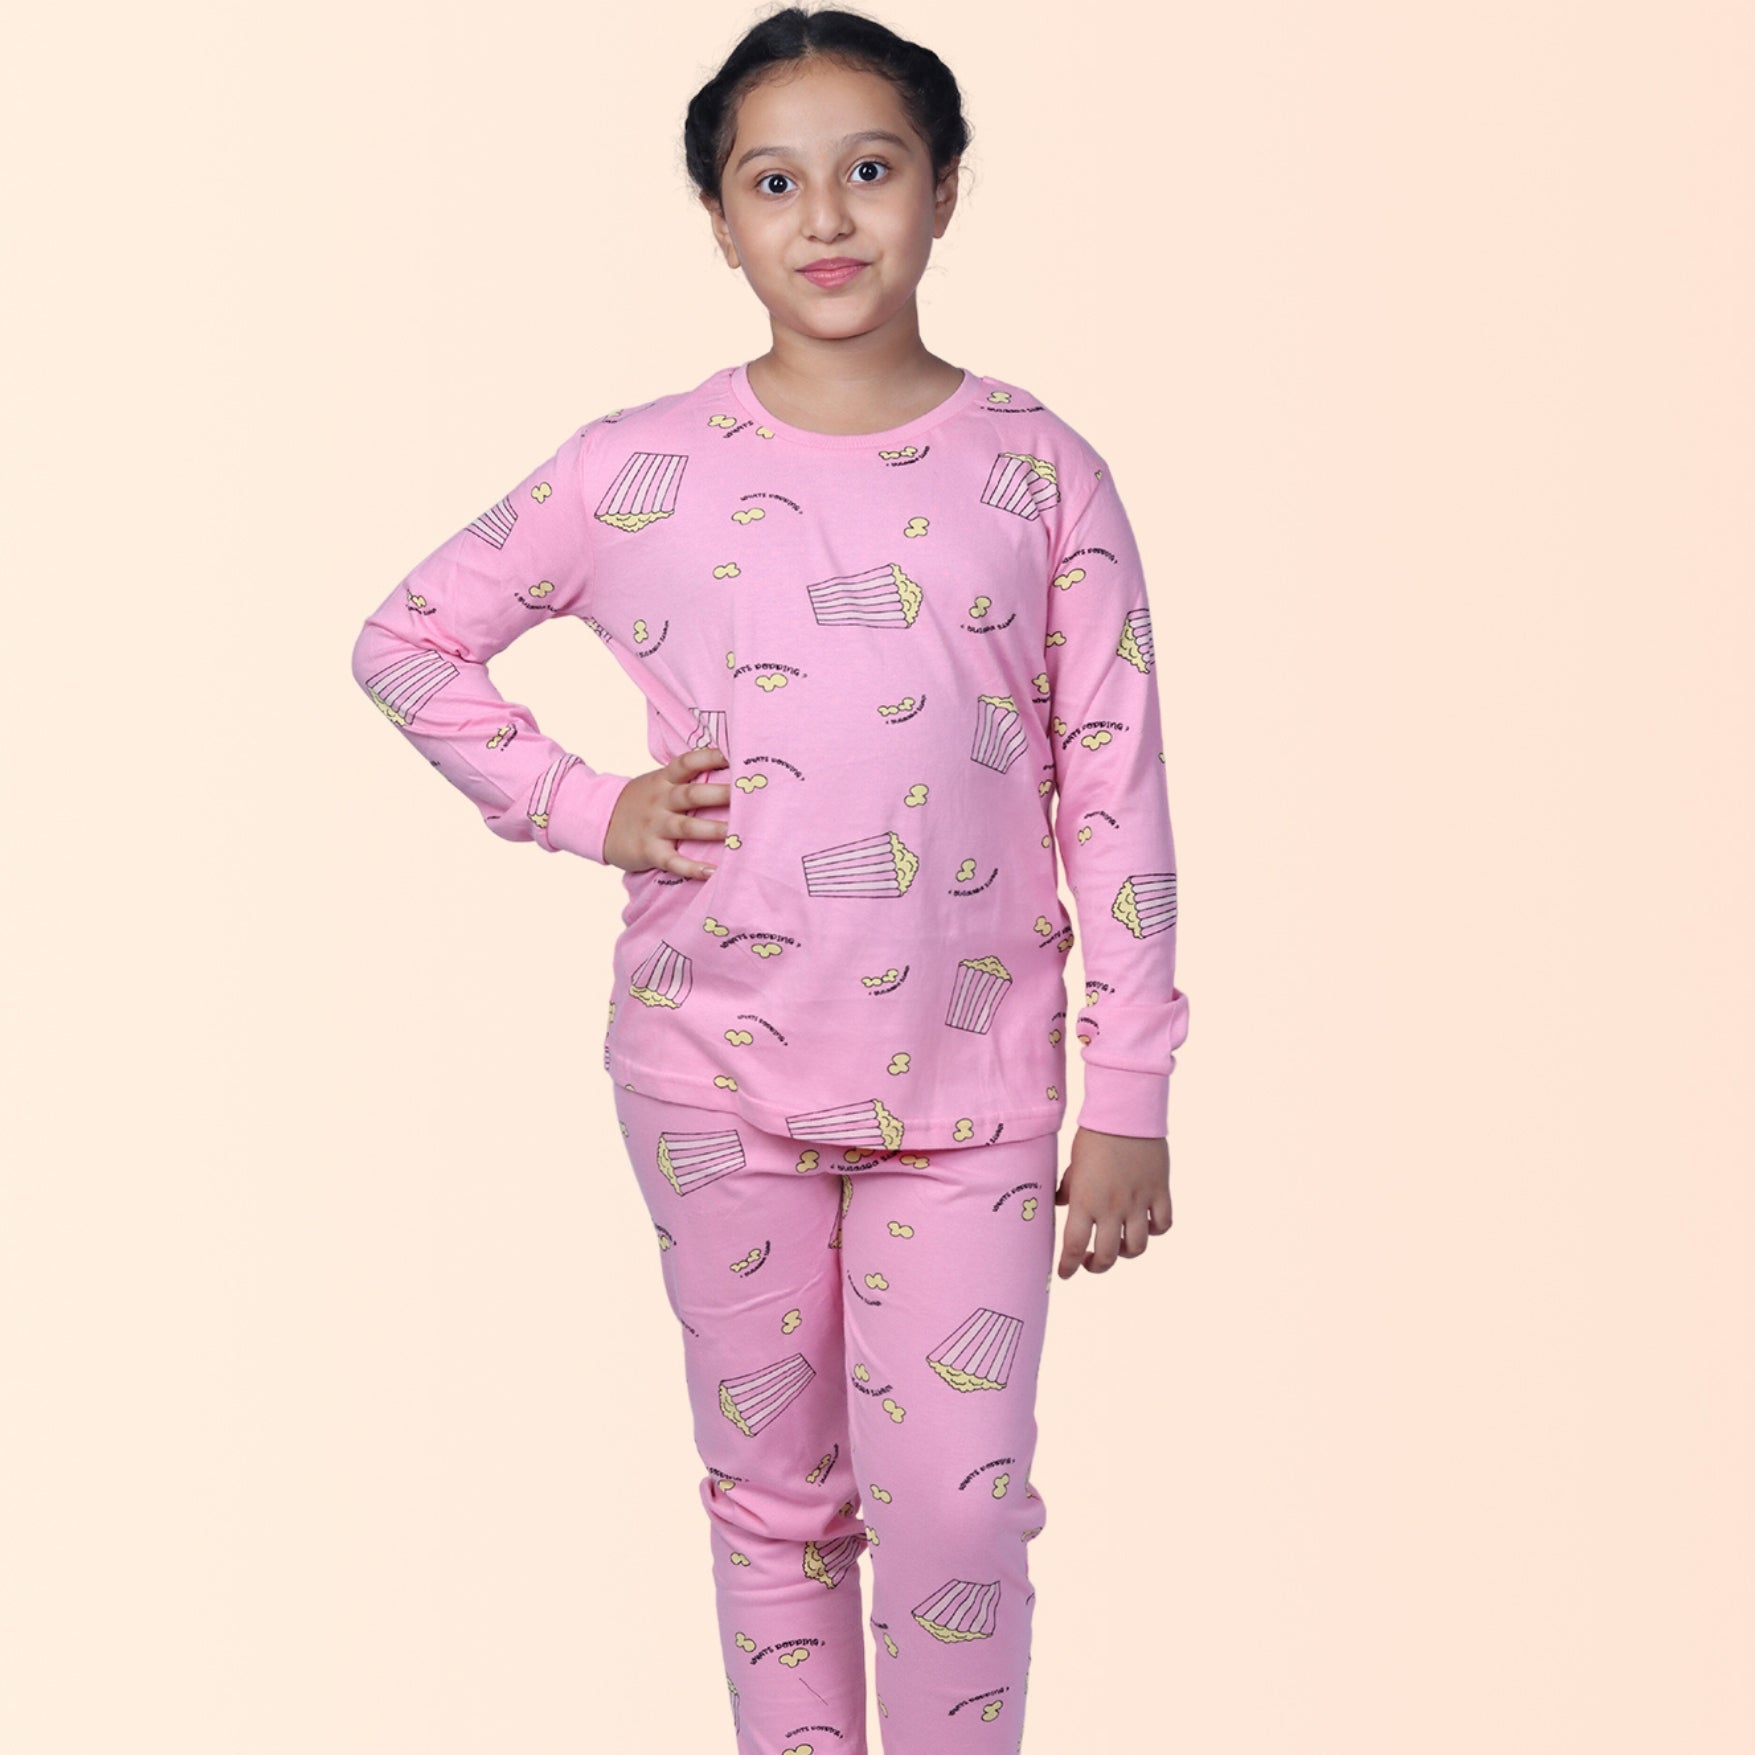 Full Sleeve Night Suit For Girl In Pink Colour - Popcorn